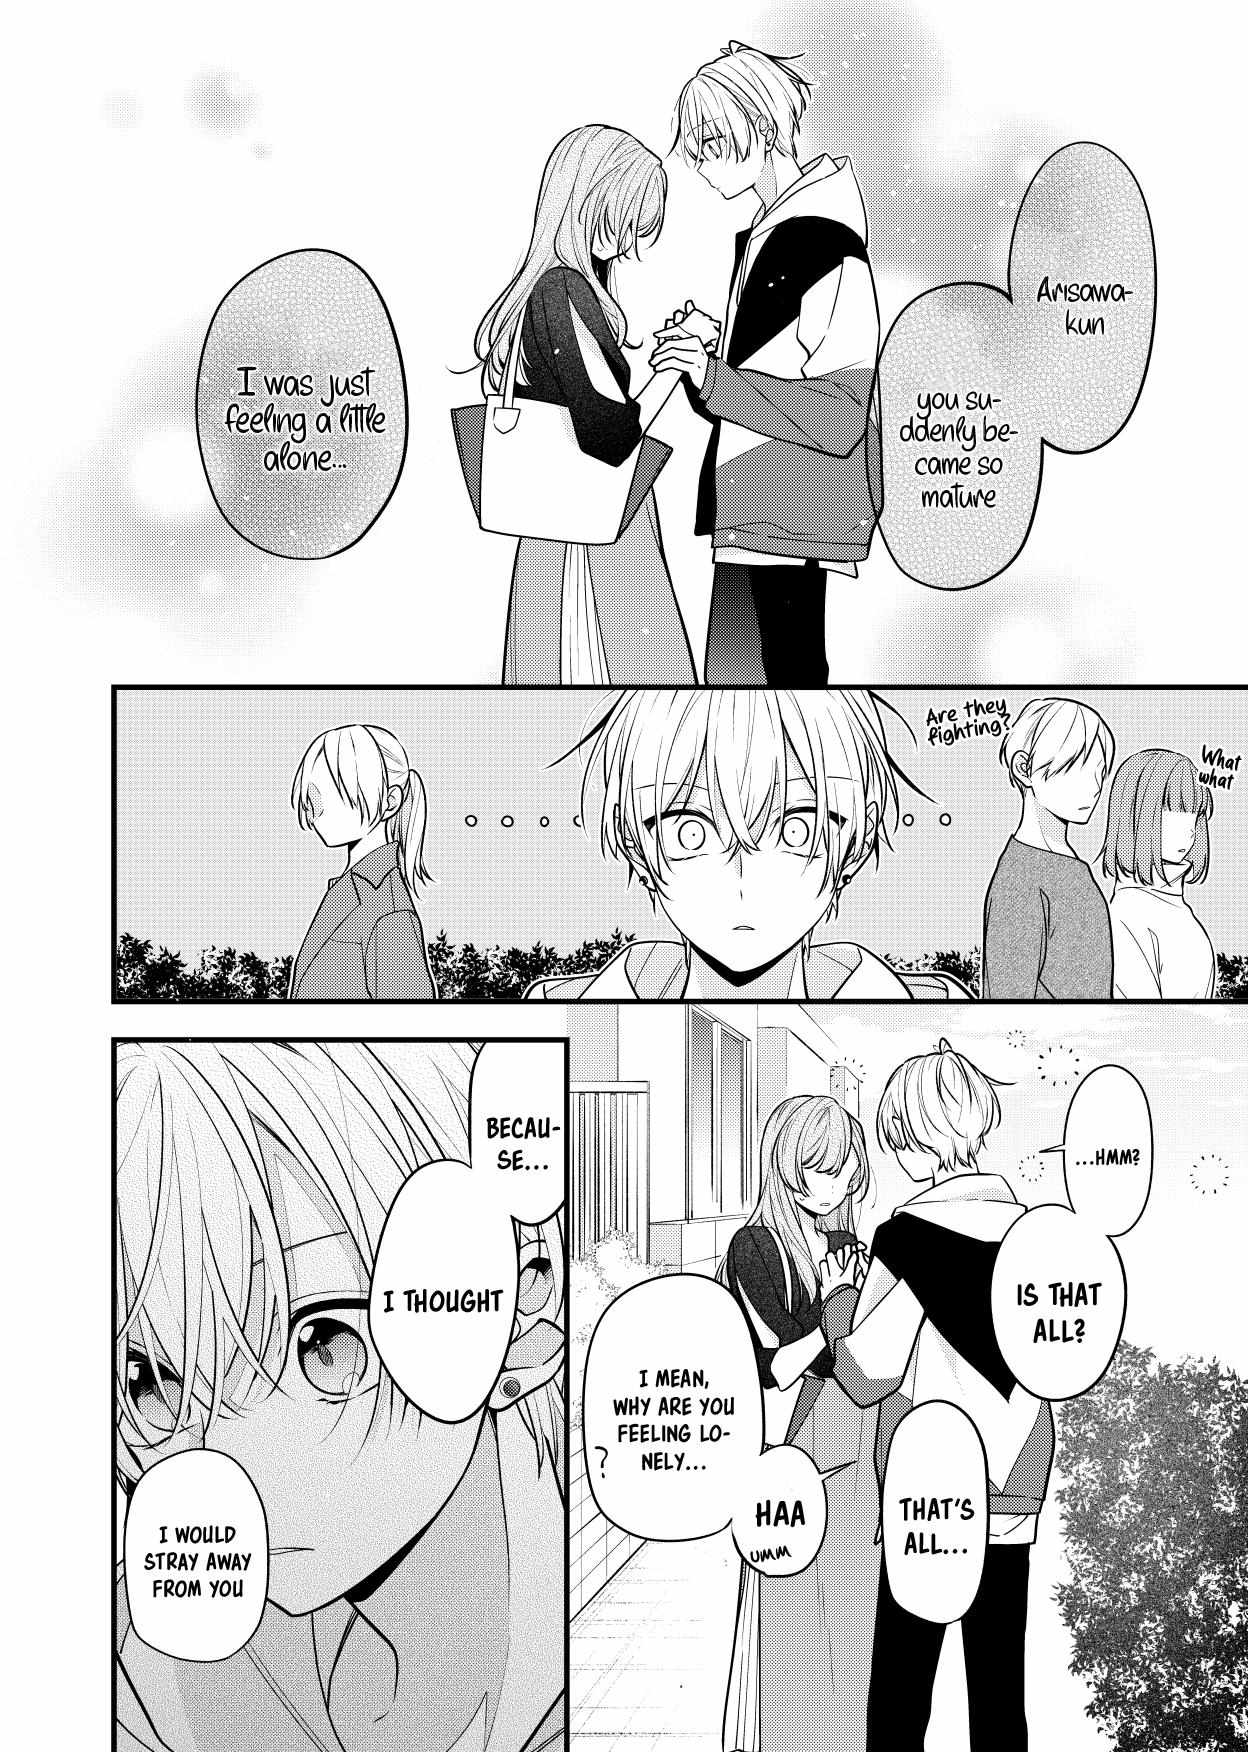 The Story Of A Guy Who Fell In Love With His Friend's Sister - 18 page 5-9481c918